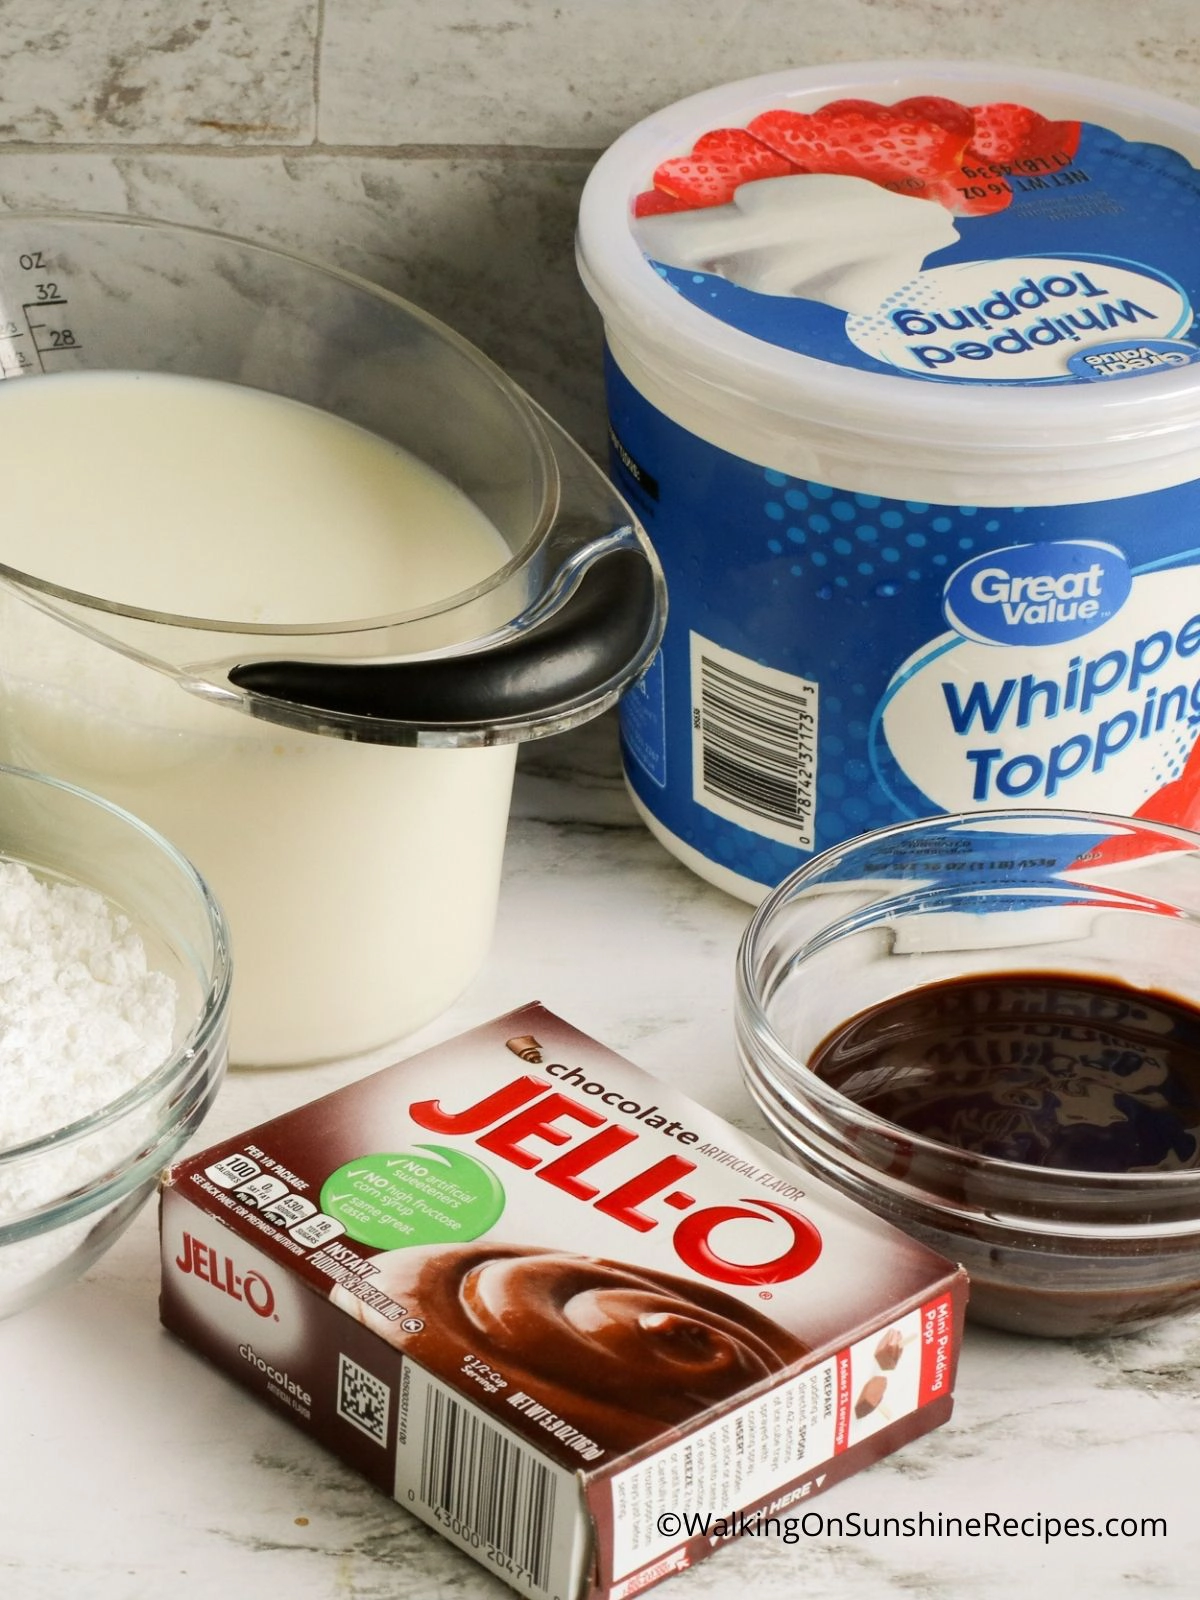 Ingredients for Oreo Pudding Pie.